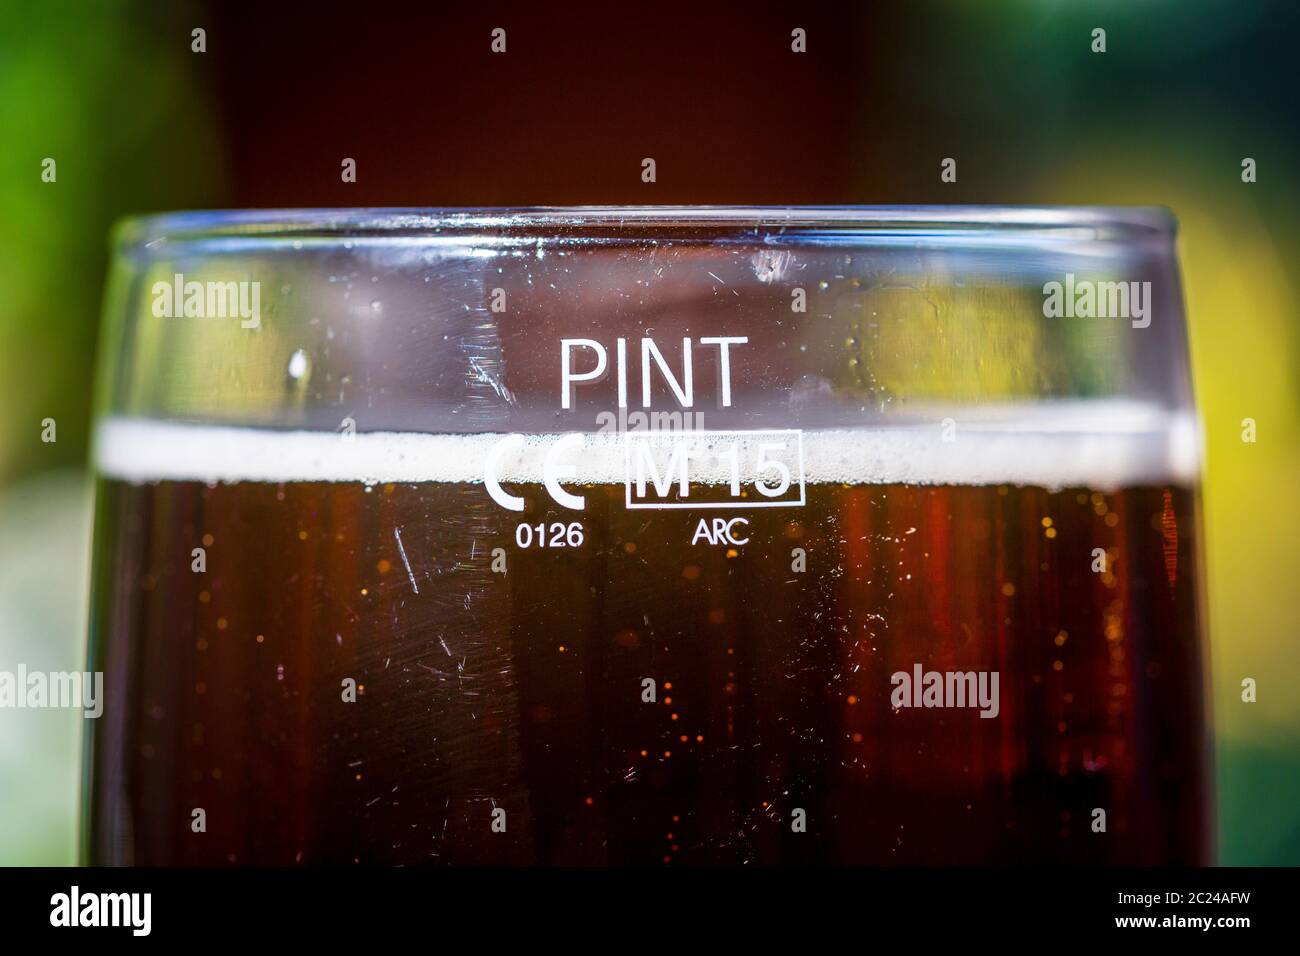 Pint of beer, in a pint glass full to the pint measure. Stock Photo